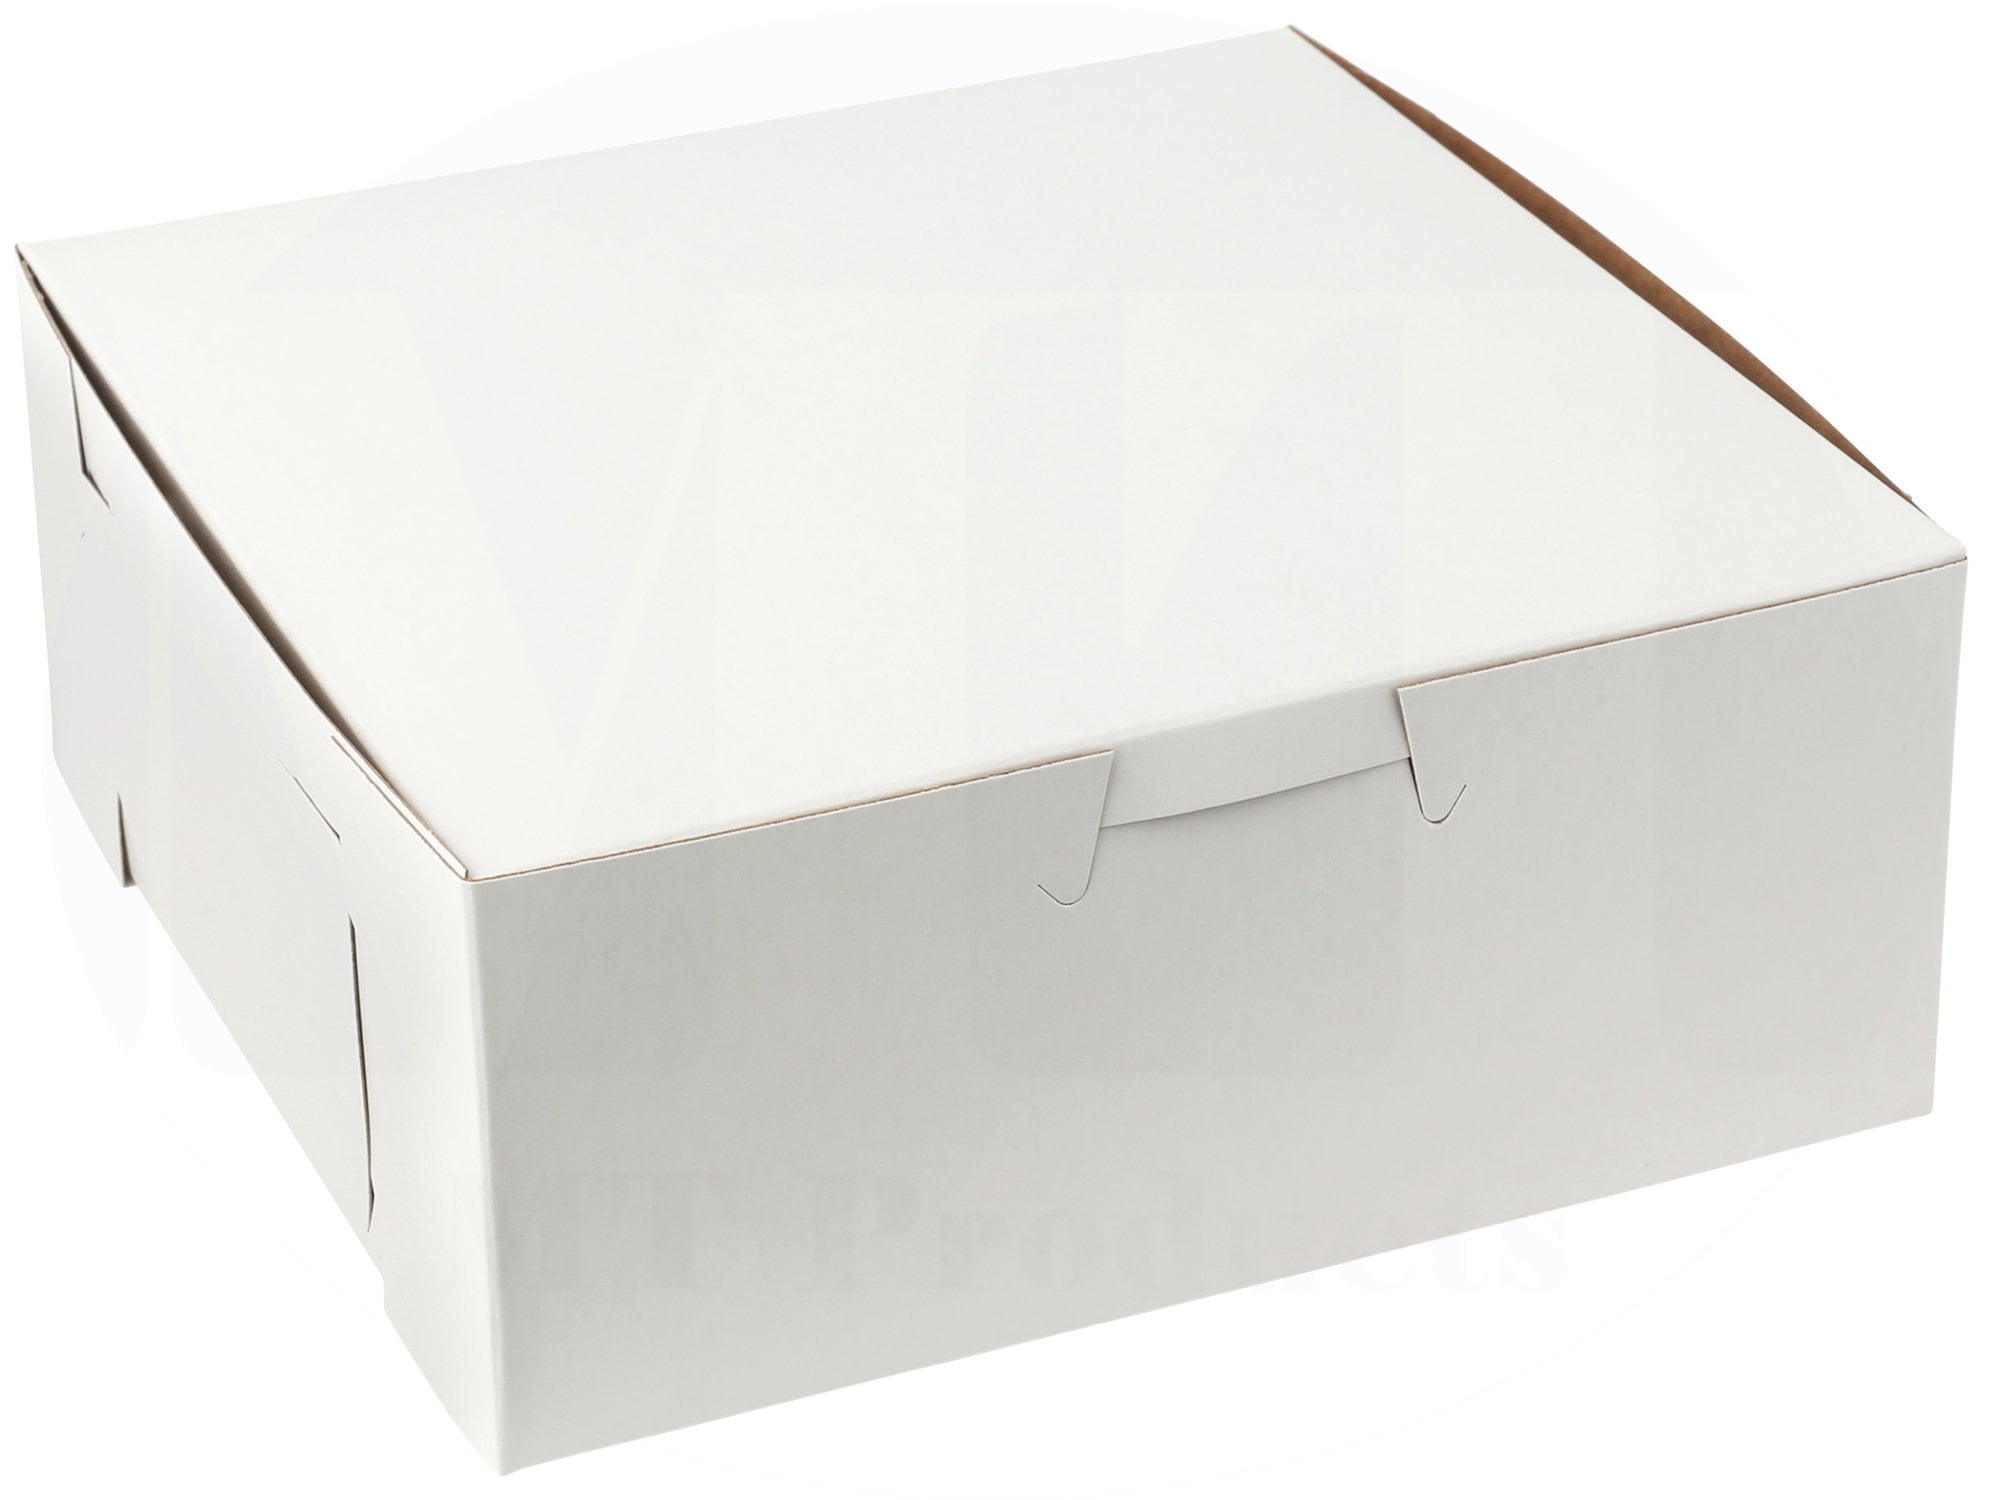 6 1/4" x 3 3/4" x 2 1/8" Paperboard White Bakery Pack of 15 Eclair Box 